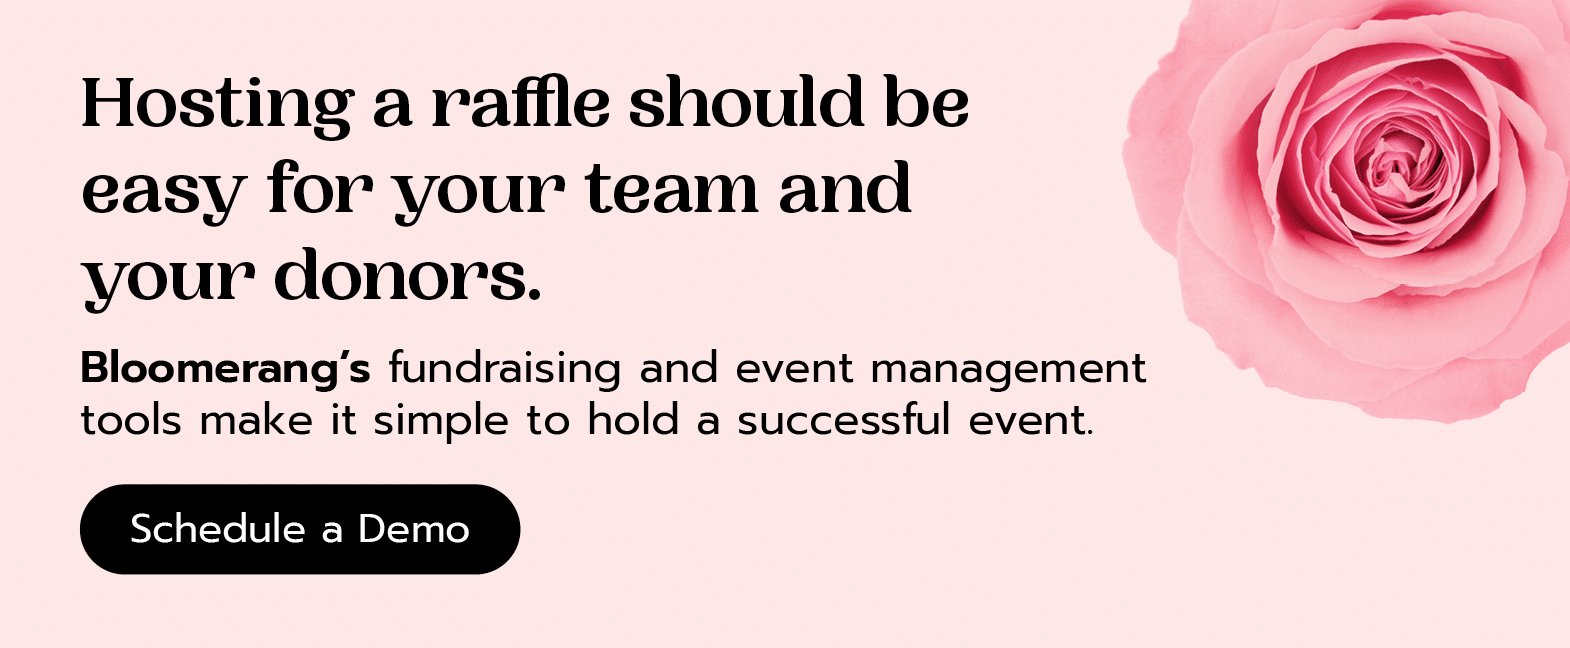 Hosting a raffle should be easy for your team and your donors. Bloomerang’s fundraising and event management tools make it simple to a successful event. Schedule a demo here. 